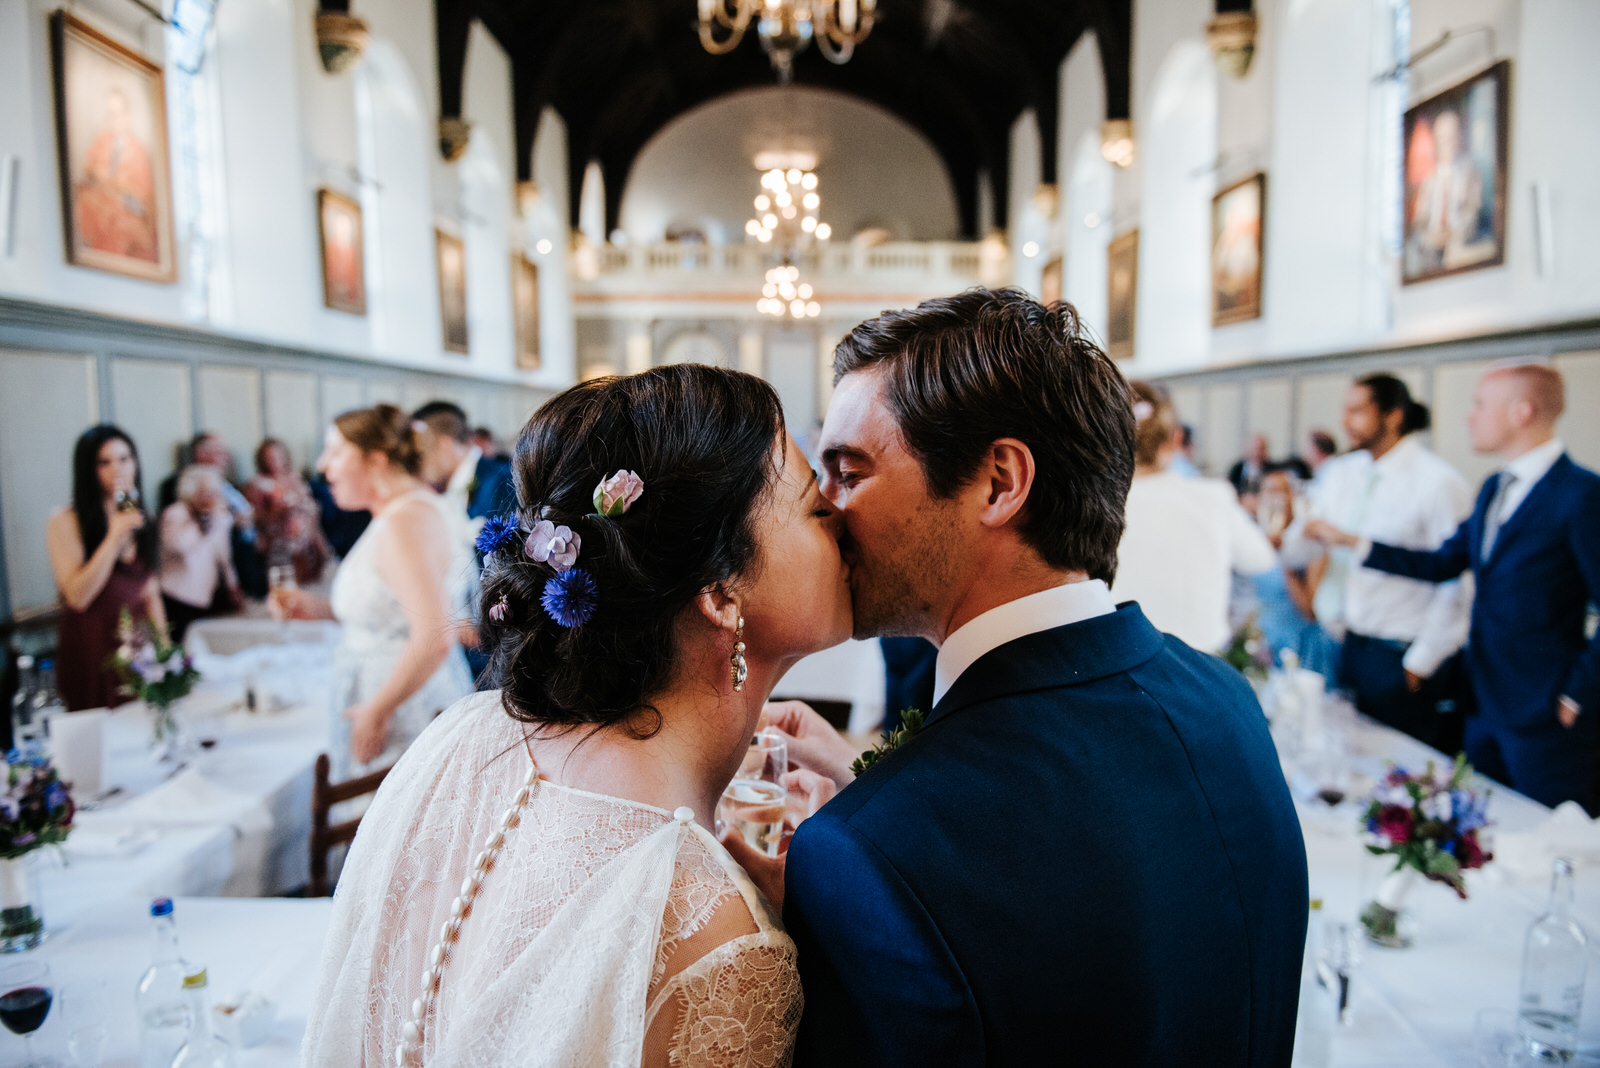 Bride and groom kiss after wedding speeches